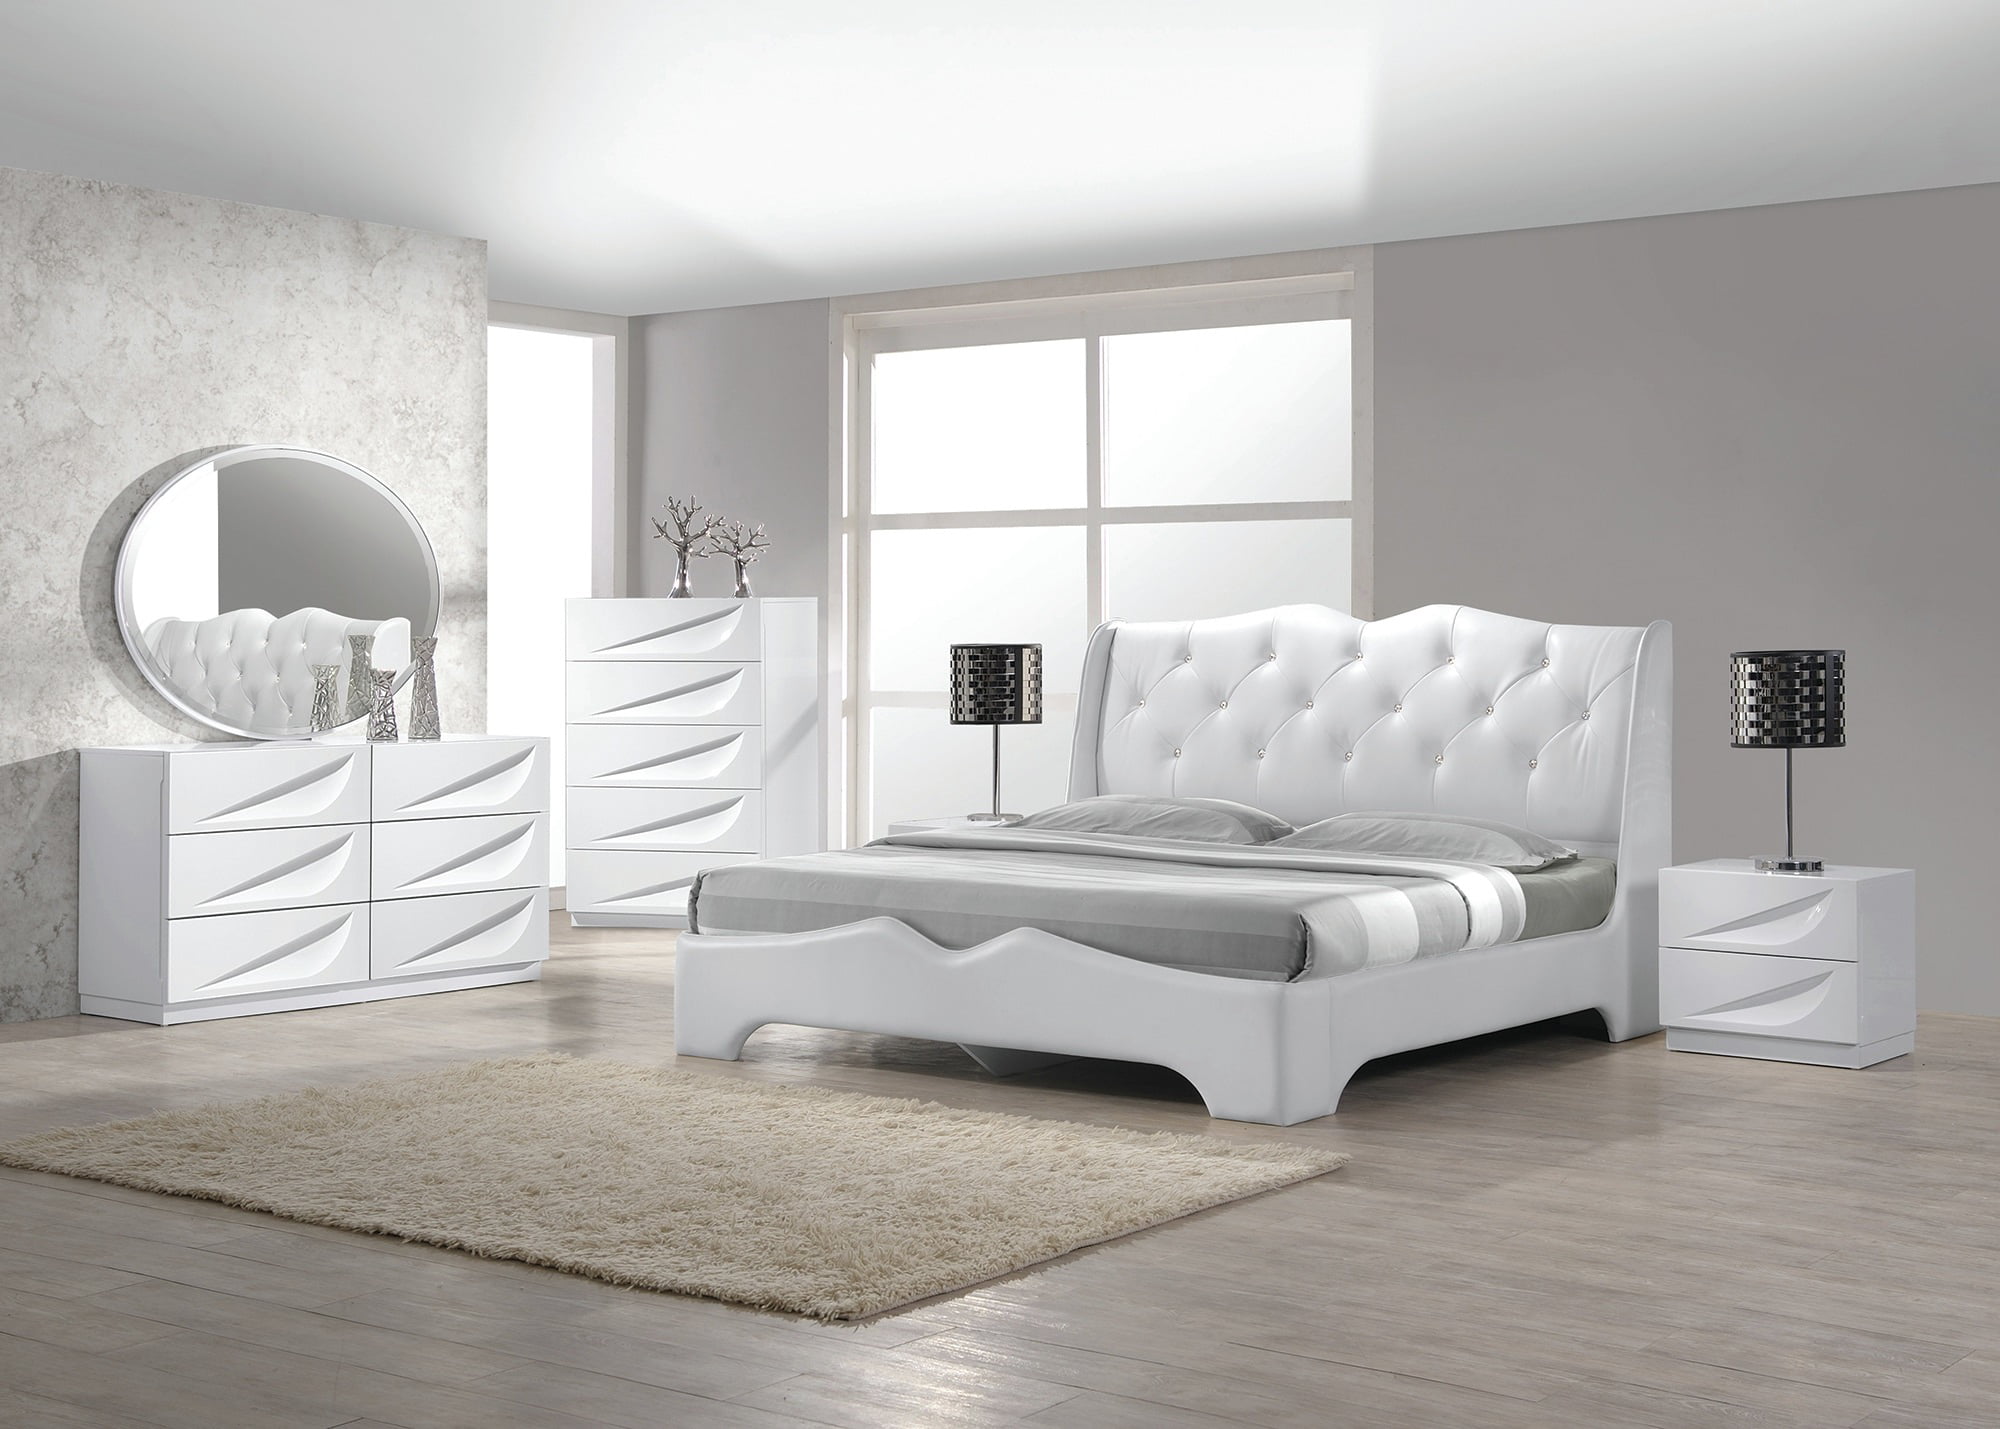 Modern Madrid 4 Piece Bedroom Set Queen Size Bed Leather Like